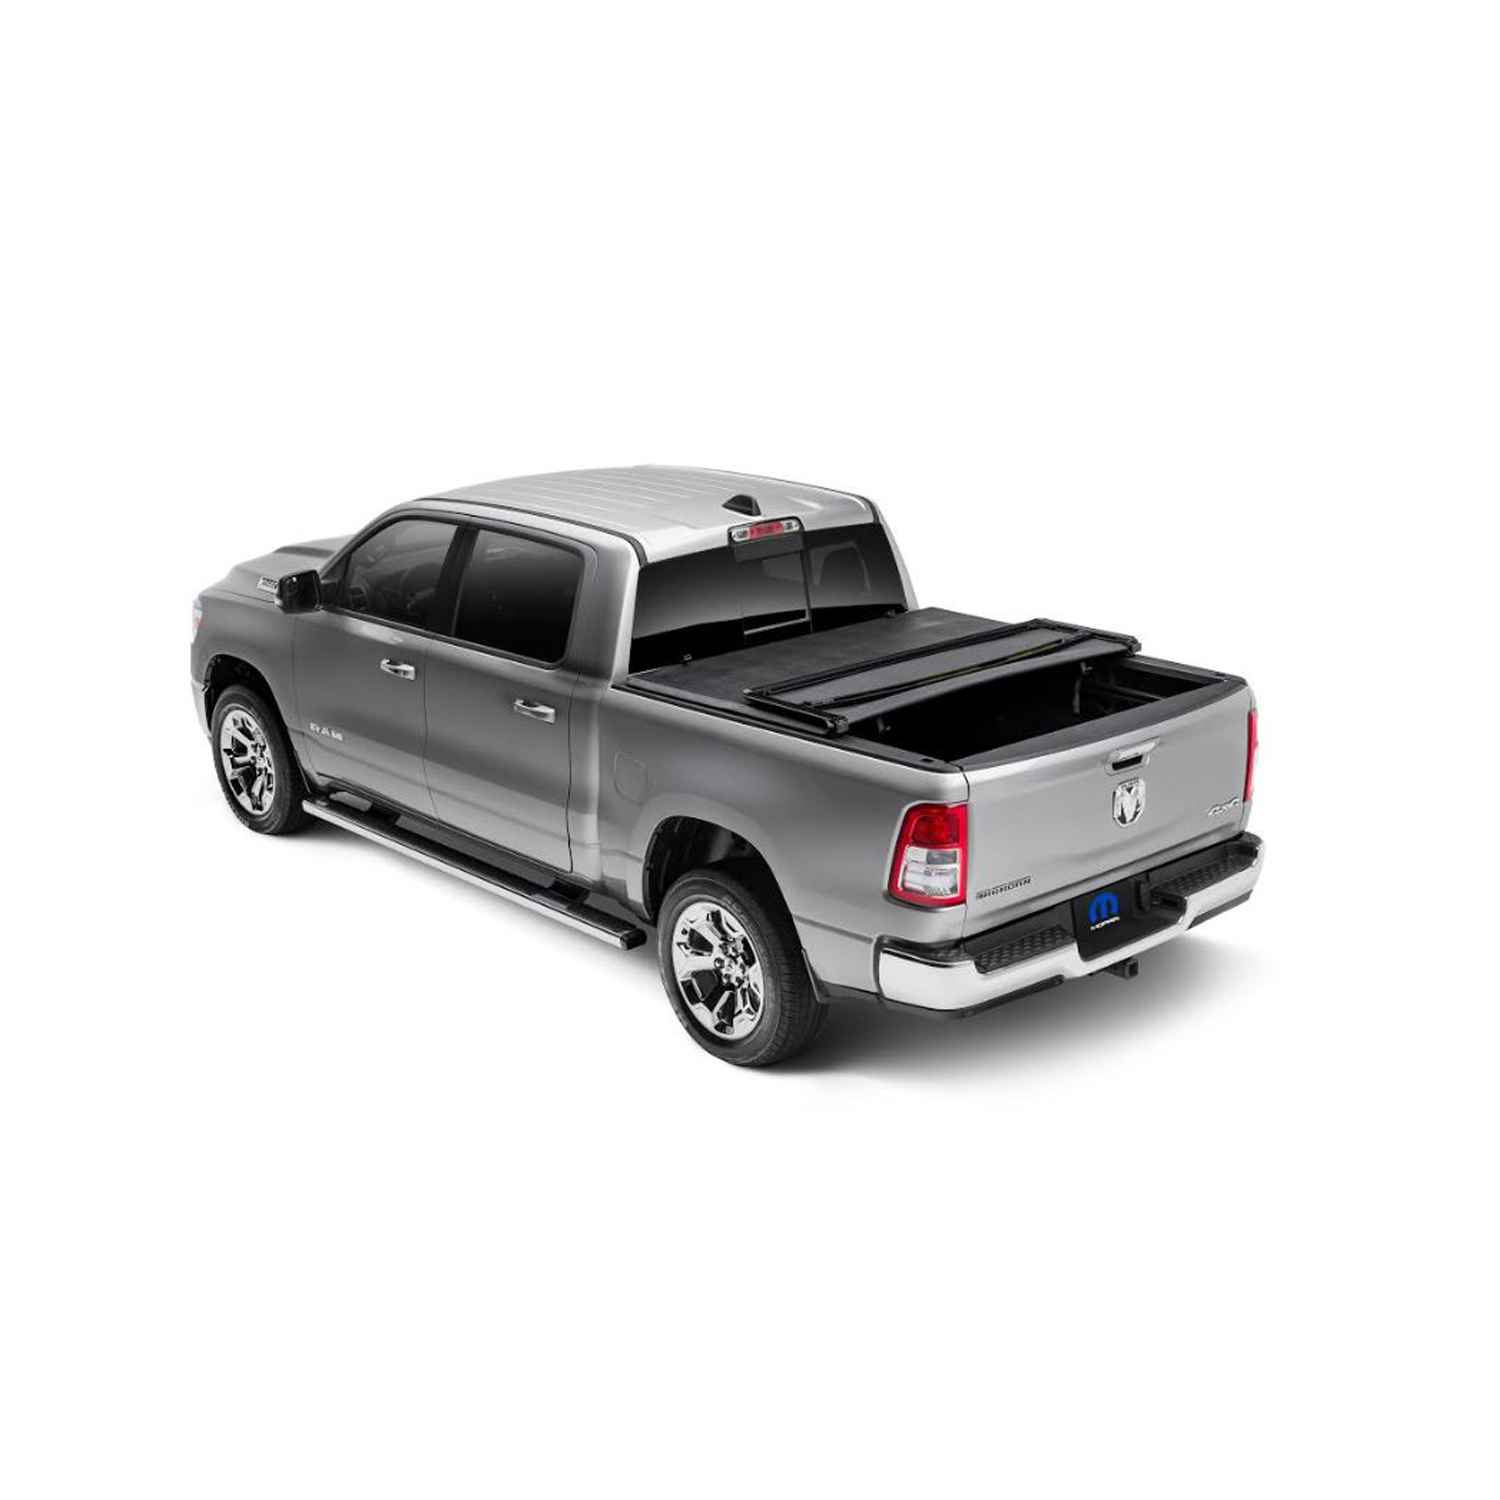 Soft Tri-Fold Tonneau for 6.4' Conventional Bed